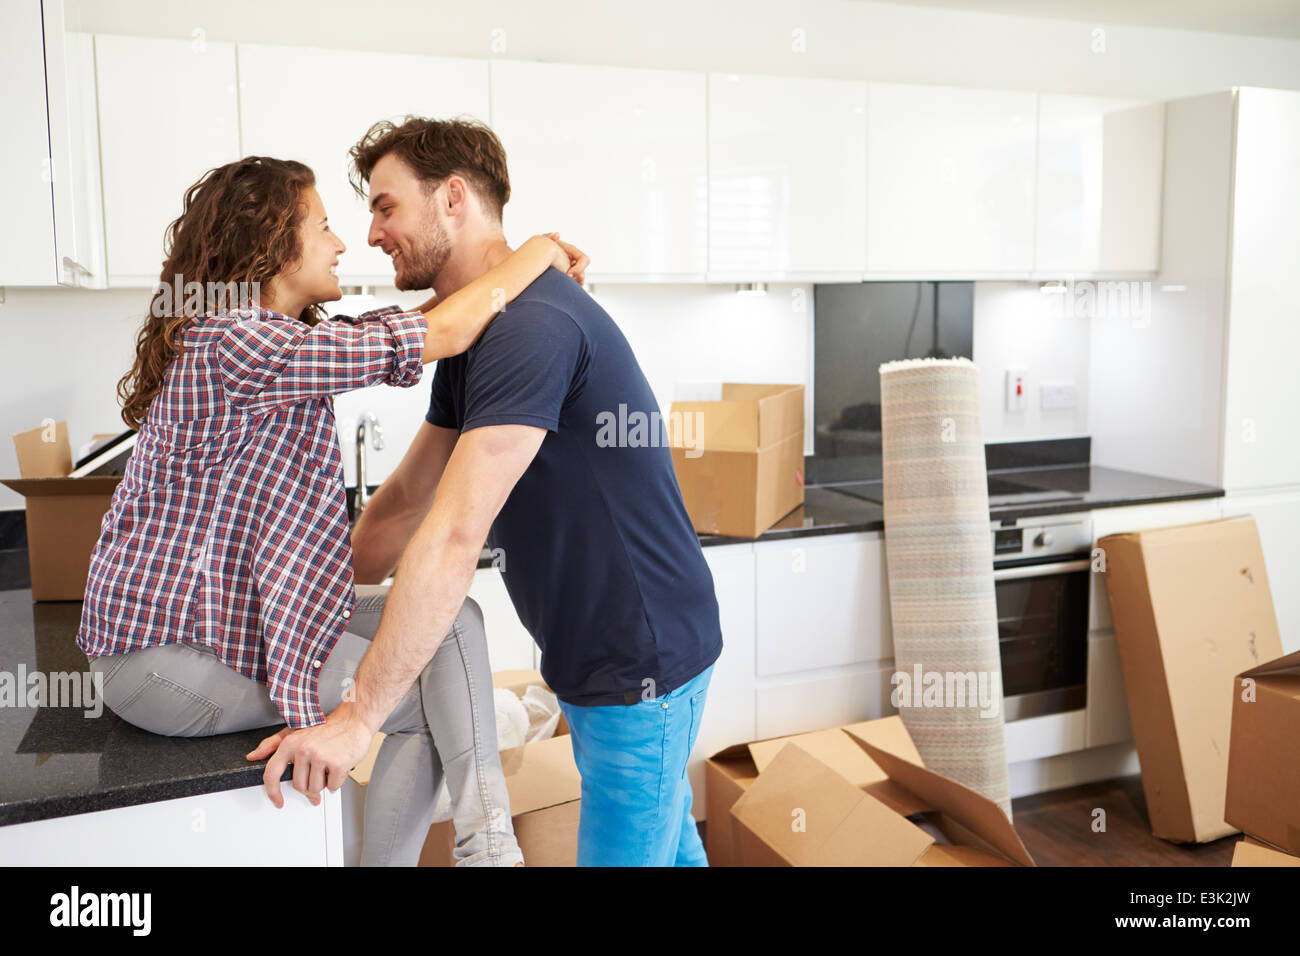 Couple Taking A Break During House Move Stock Photo